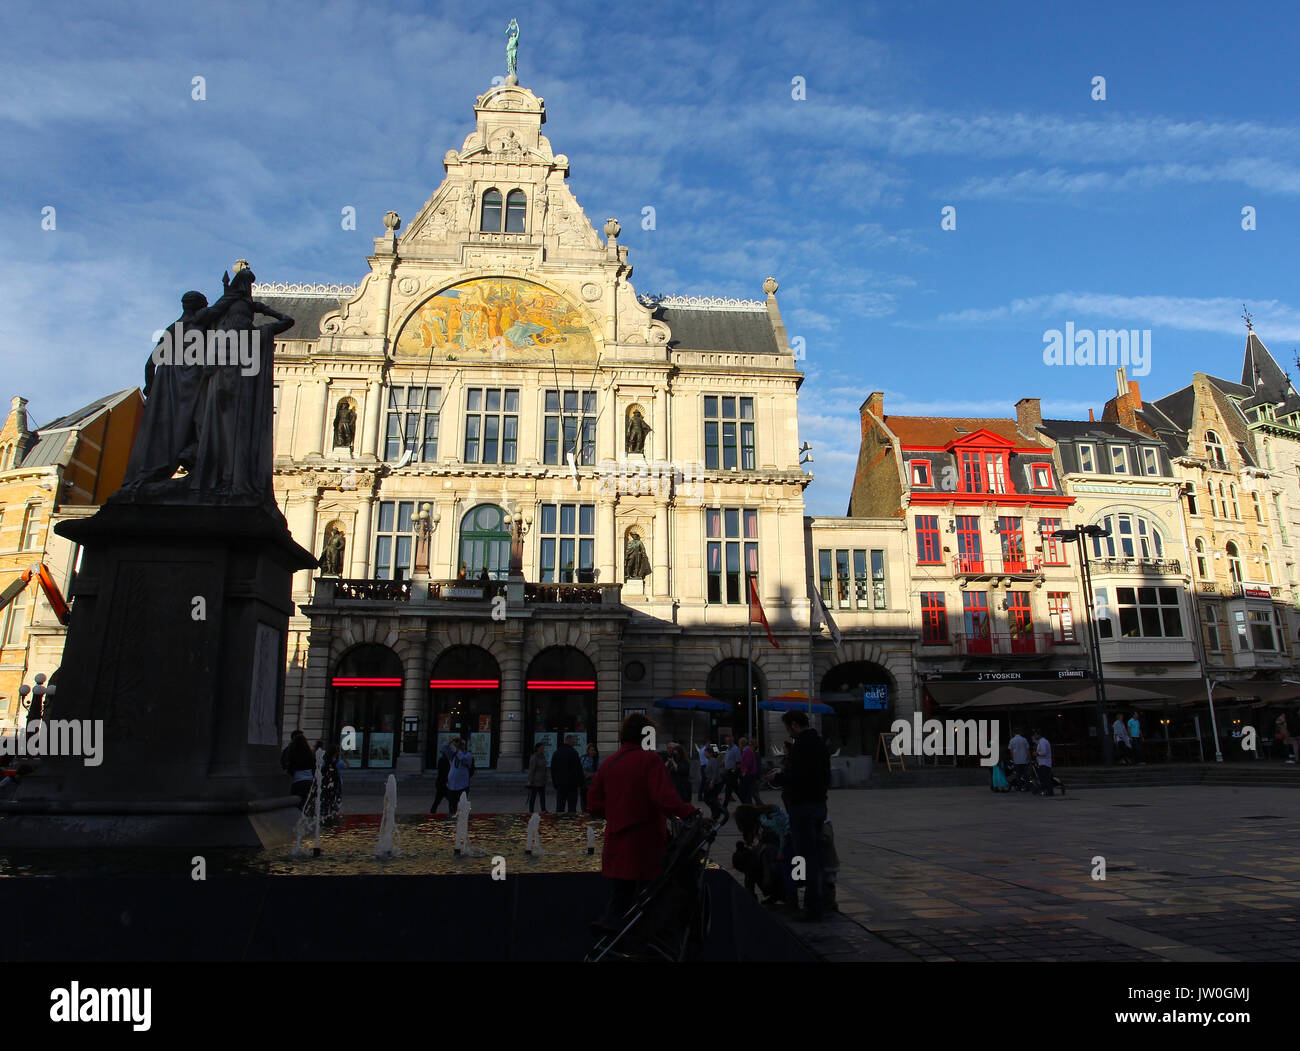 The Royal Dutch Theater in Gent Belgium  located on Sint-Baafsplein Square. The mosaic shows the god Apollo in his charriot and his muses. Stock Photo